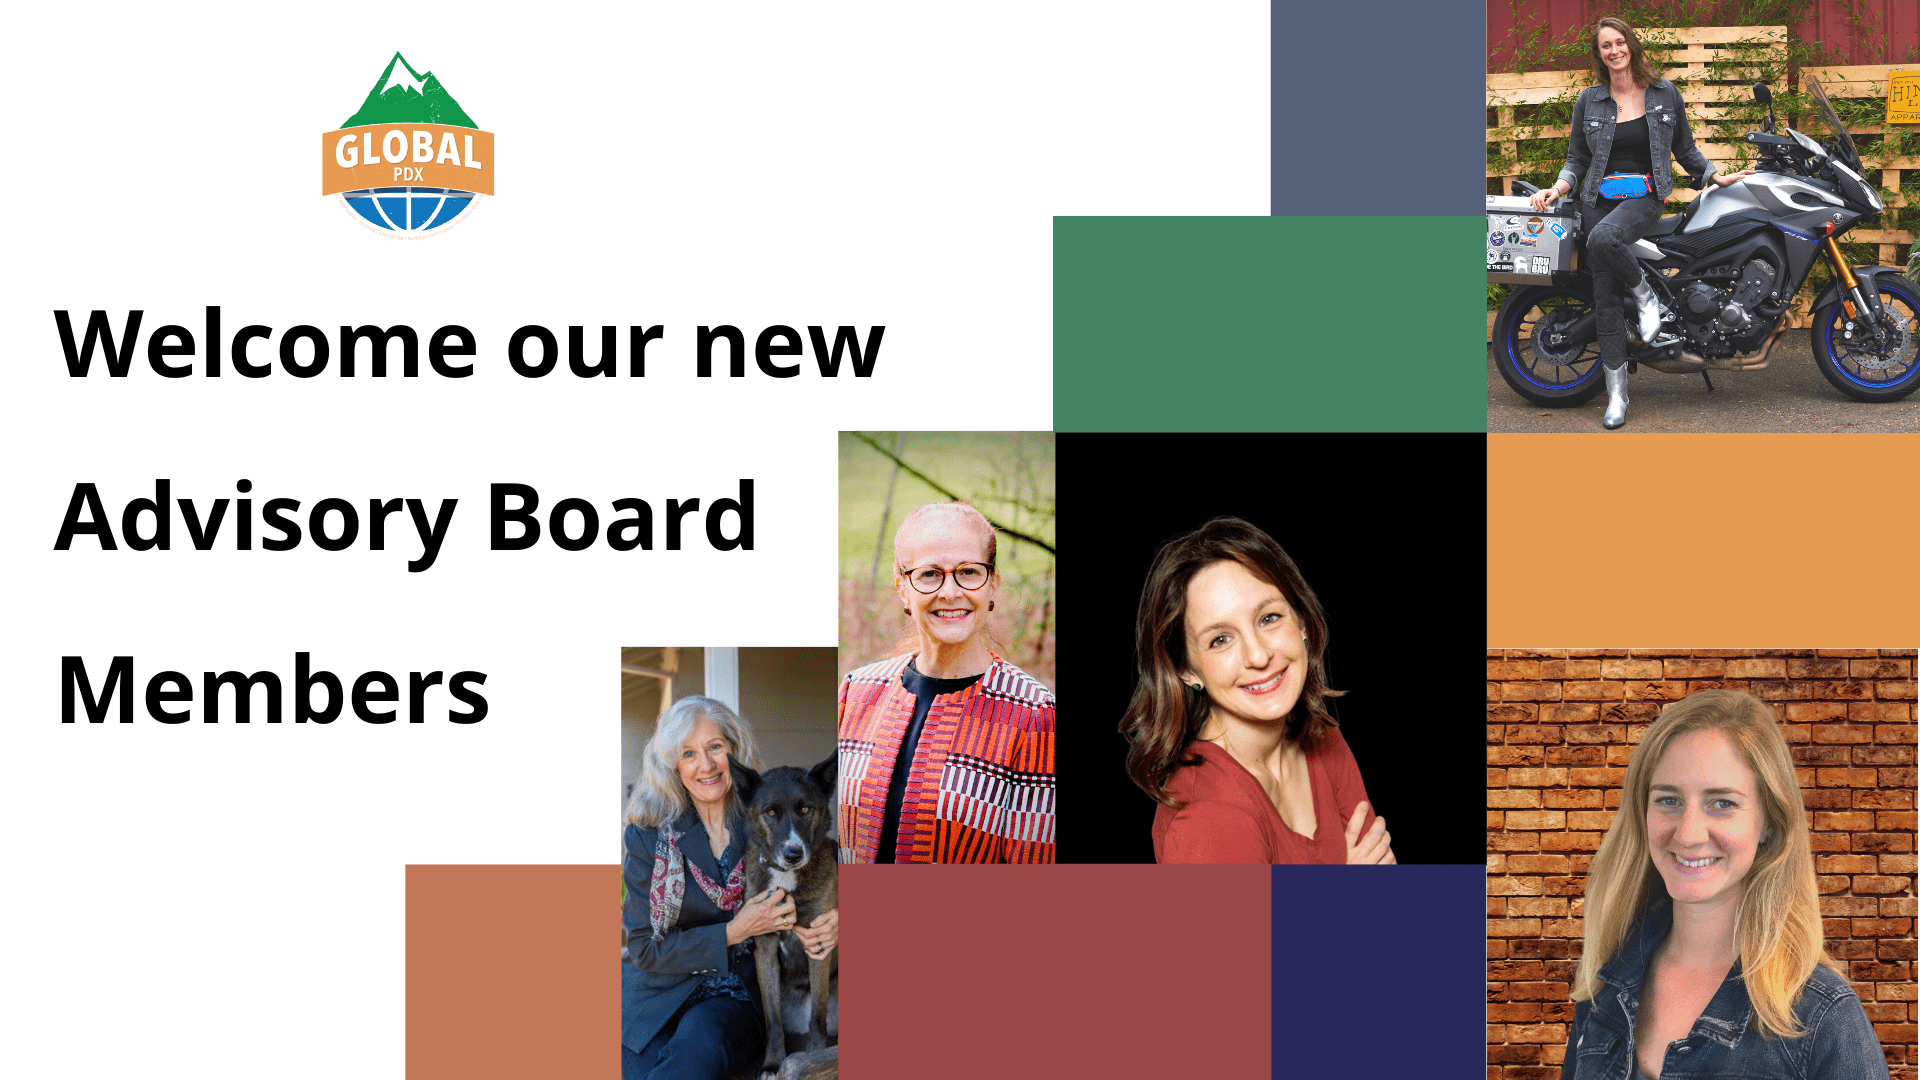 Welcome our new Advisory Board Members